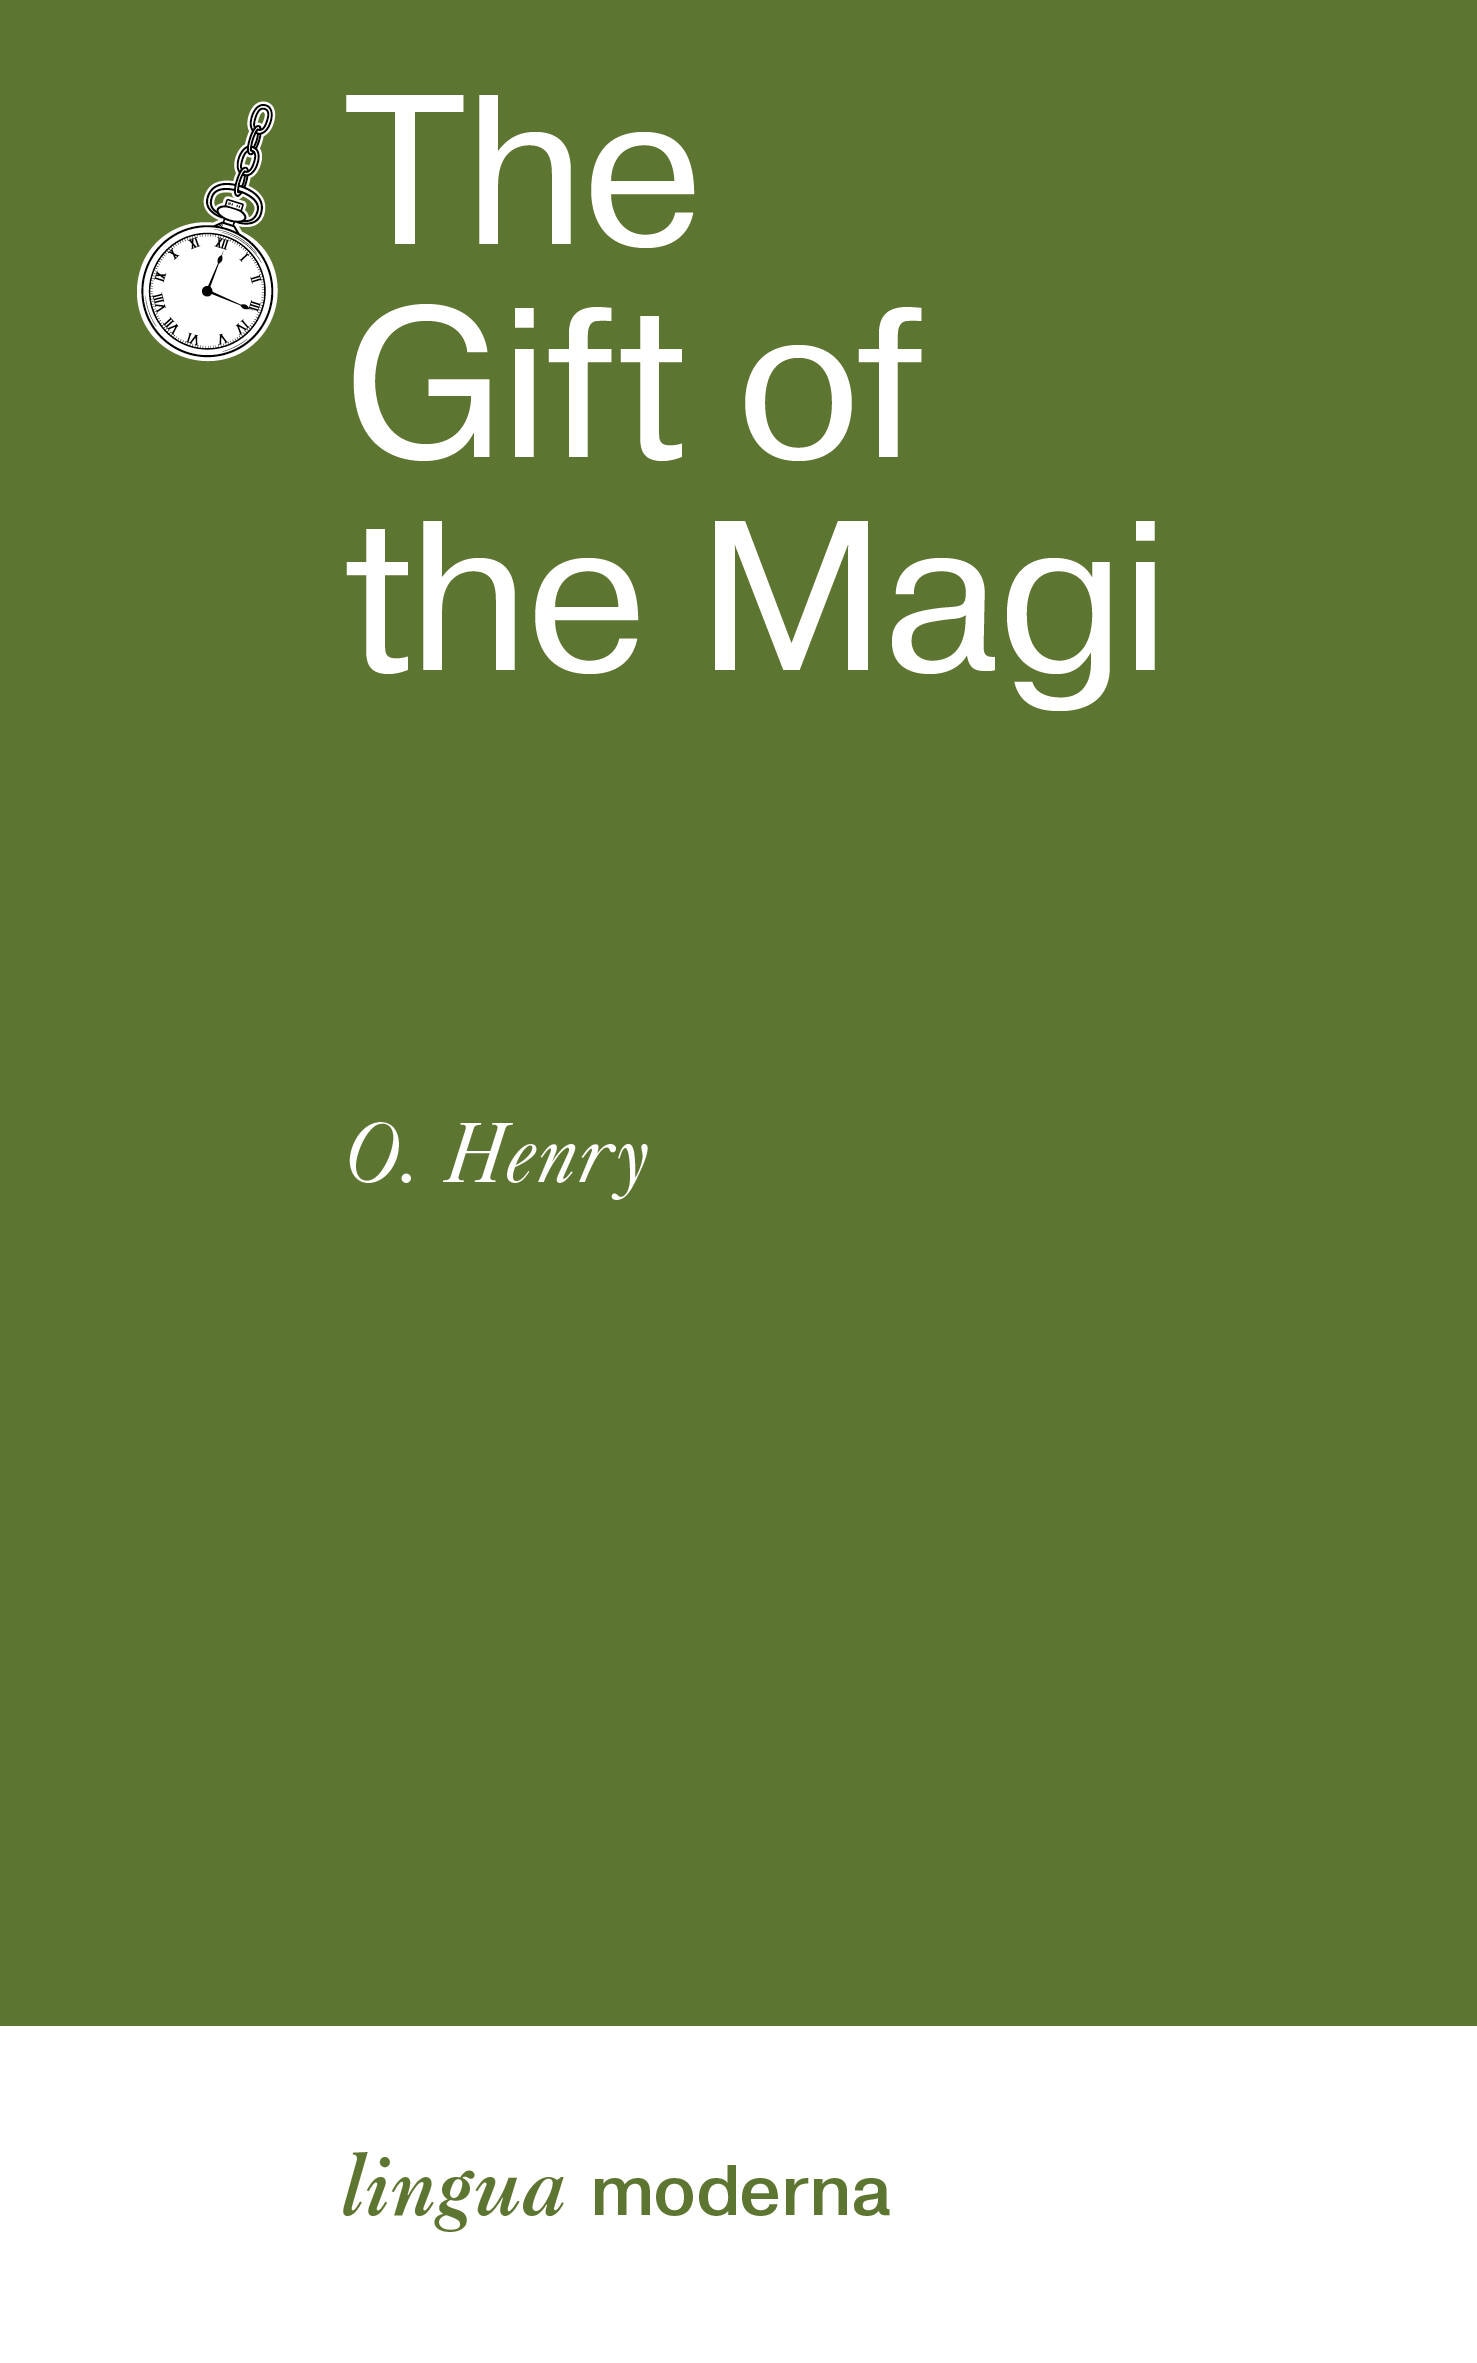 Book “The Gift of the Magi” — 2024